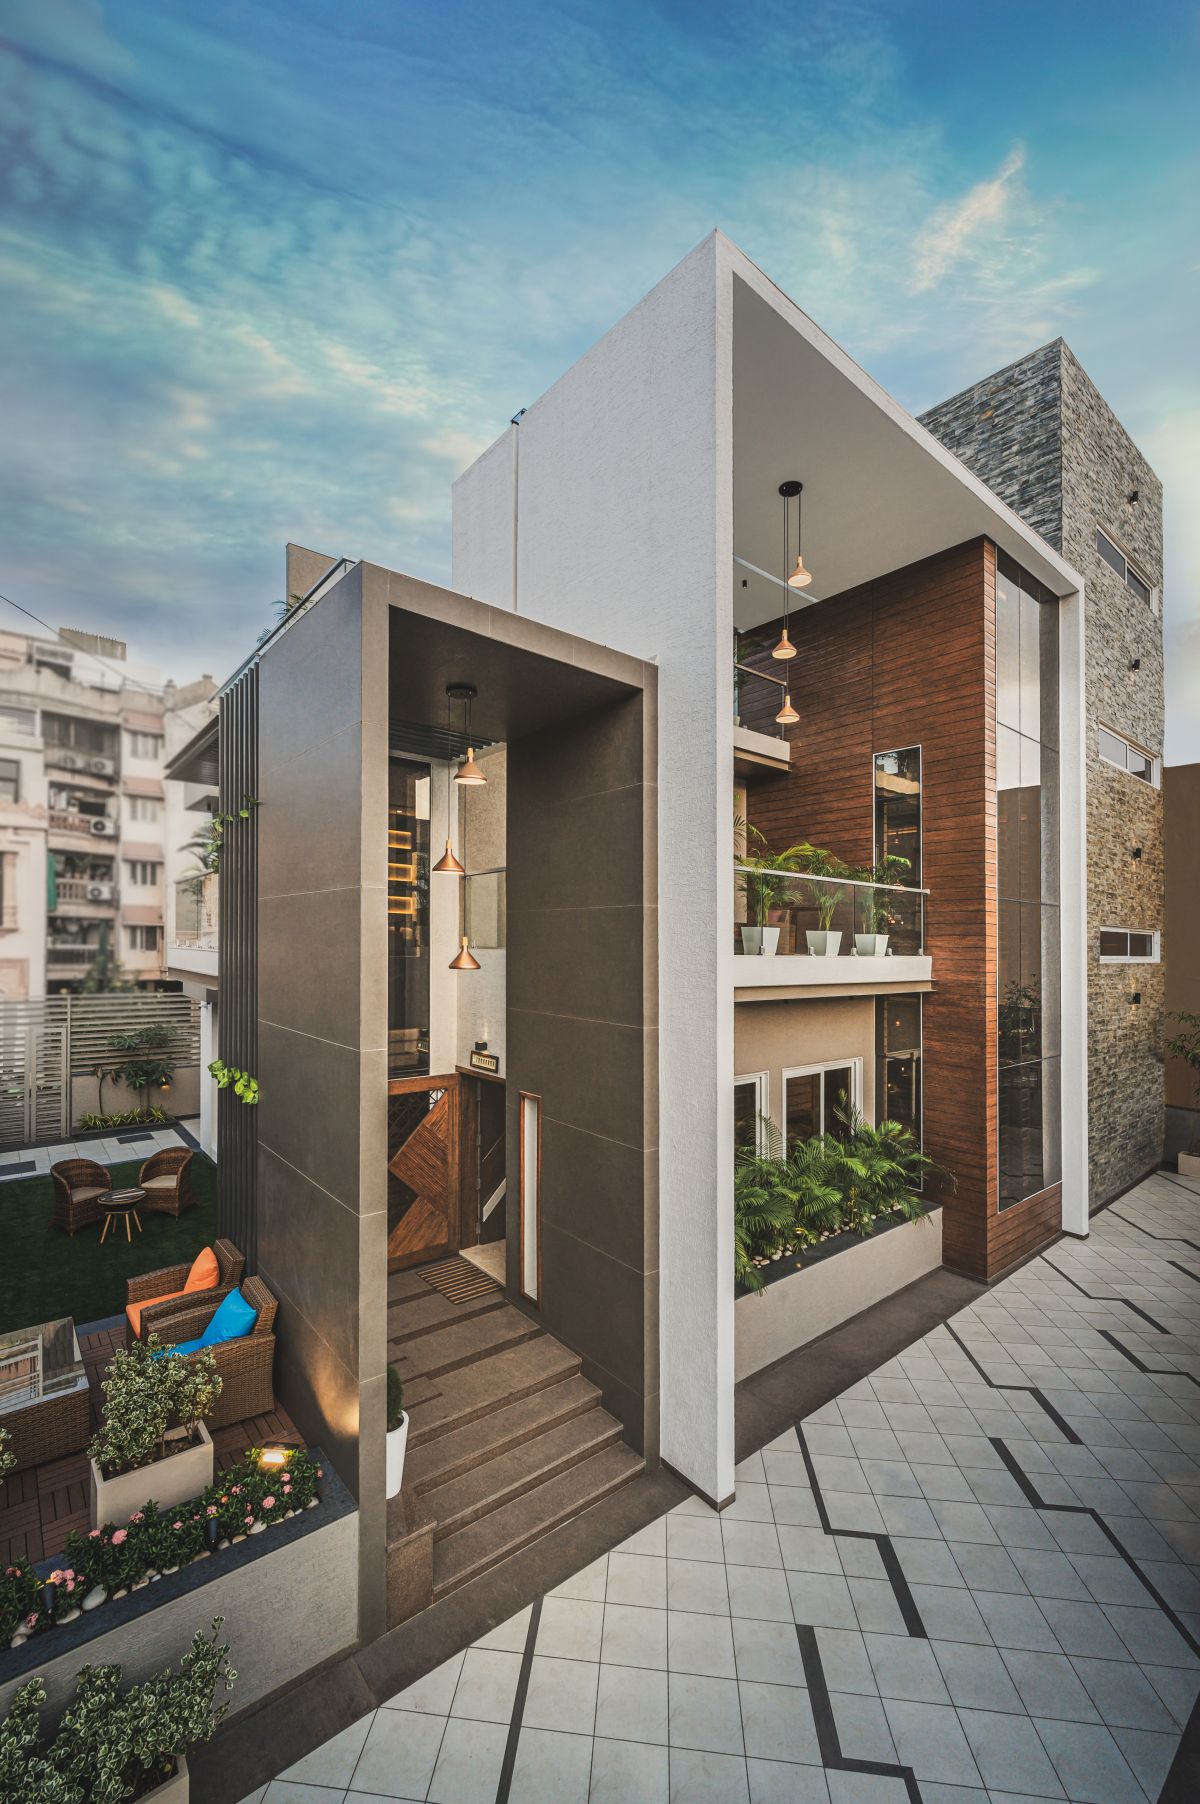 URBAN FRAME HOUSE, at AHMEDABAD, by Shayona Consultant 3